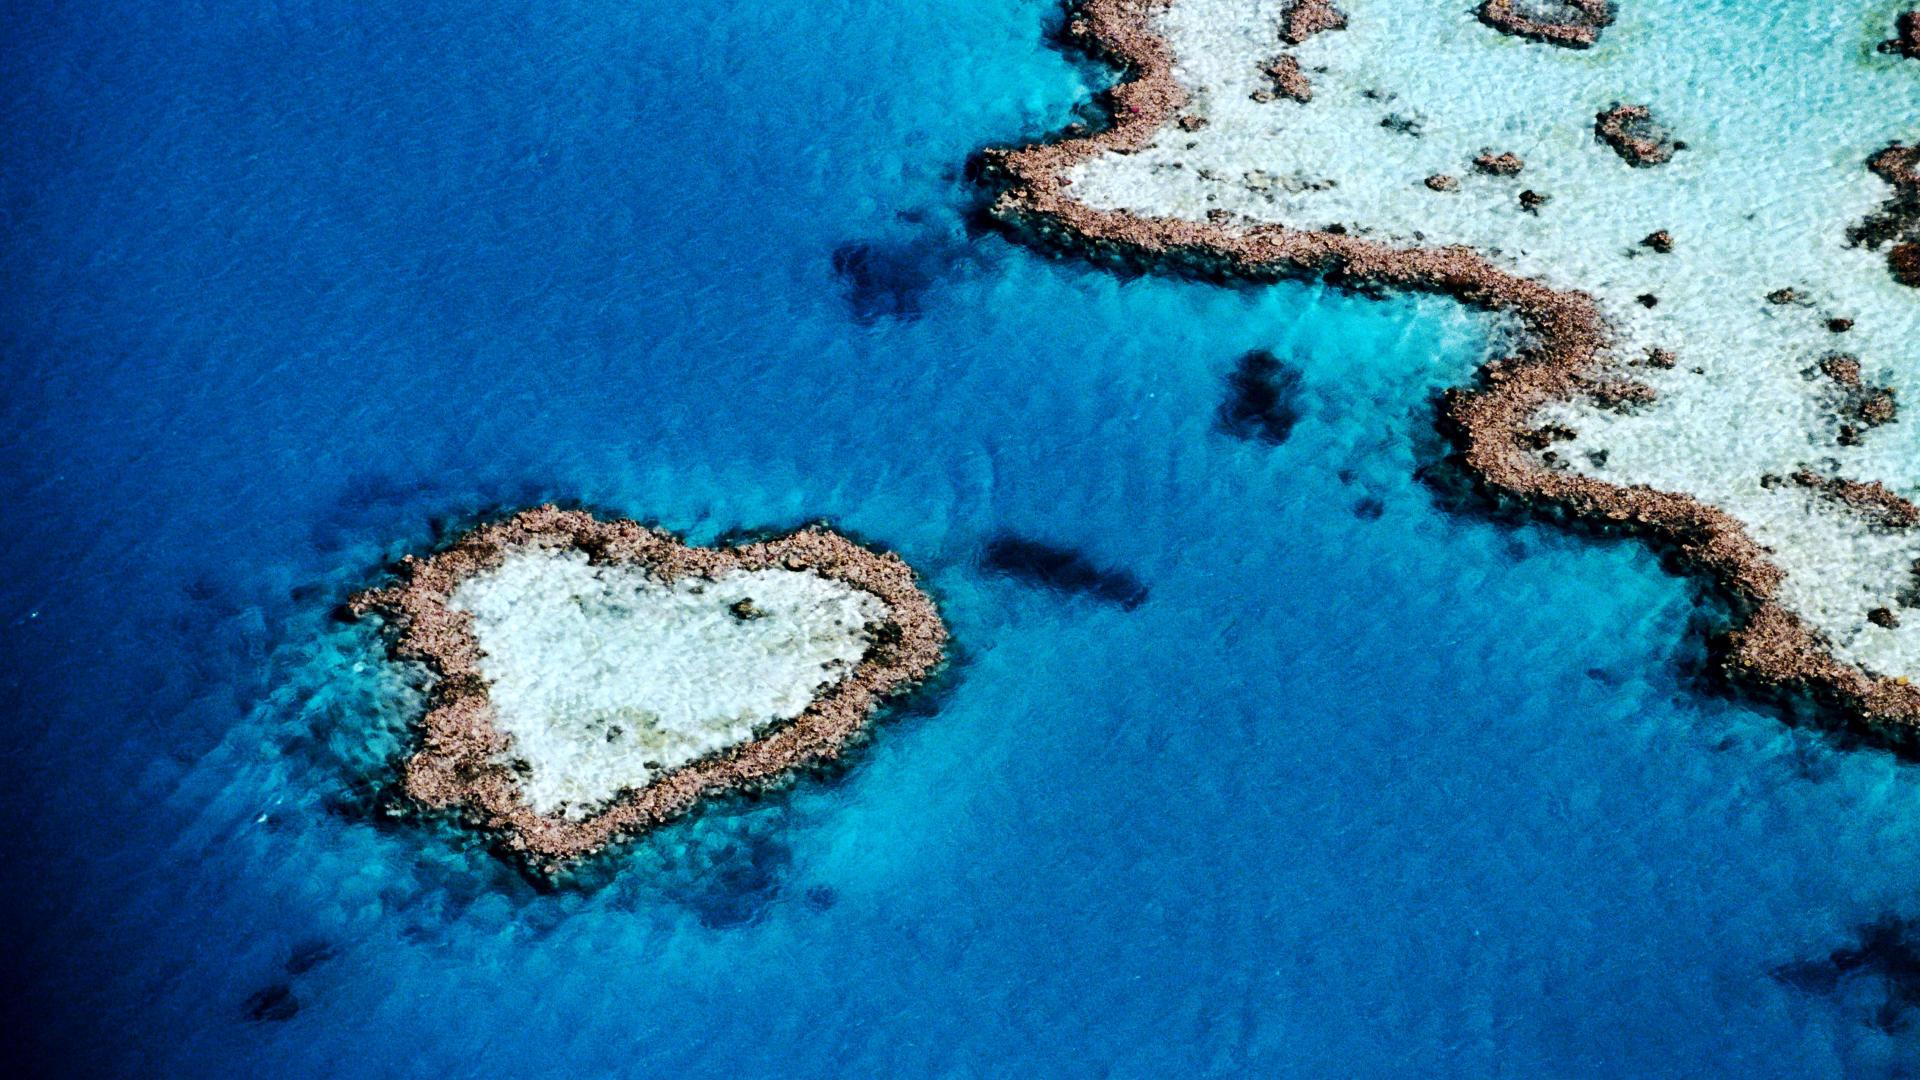 http://lovewallpapers.org/images/wallpapers/Heart%20Island-412674.jpeg